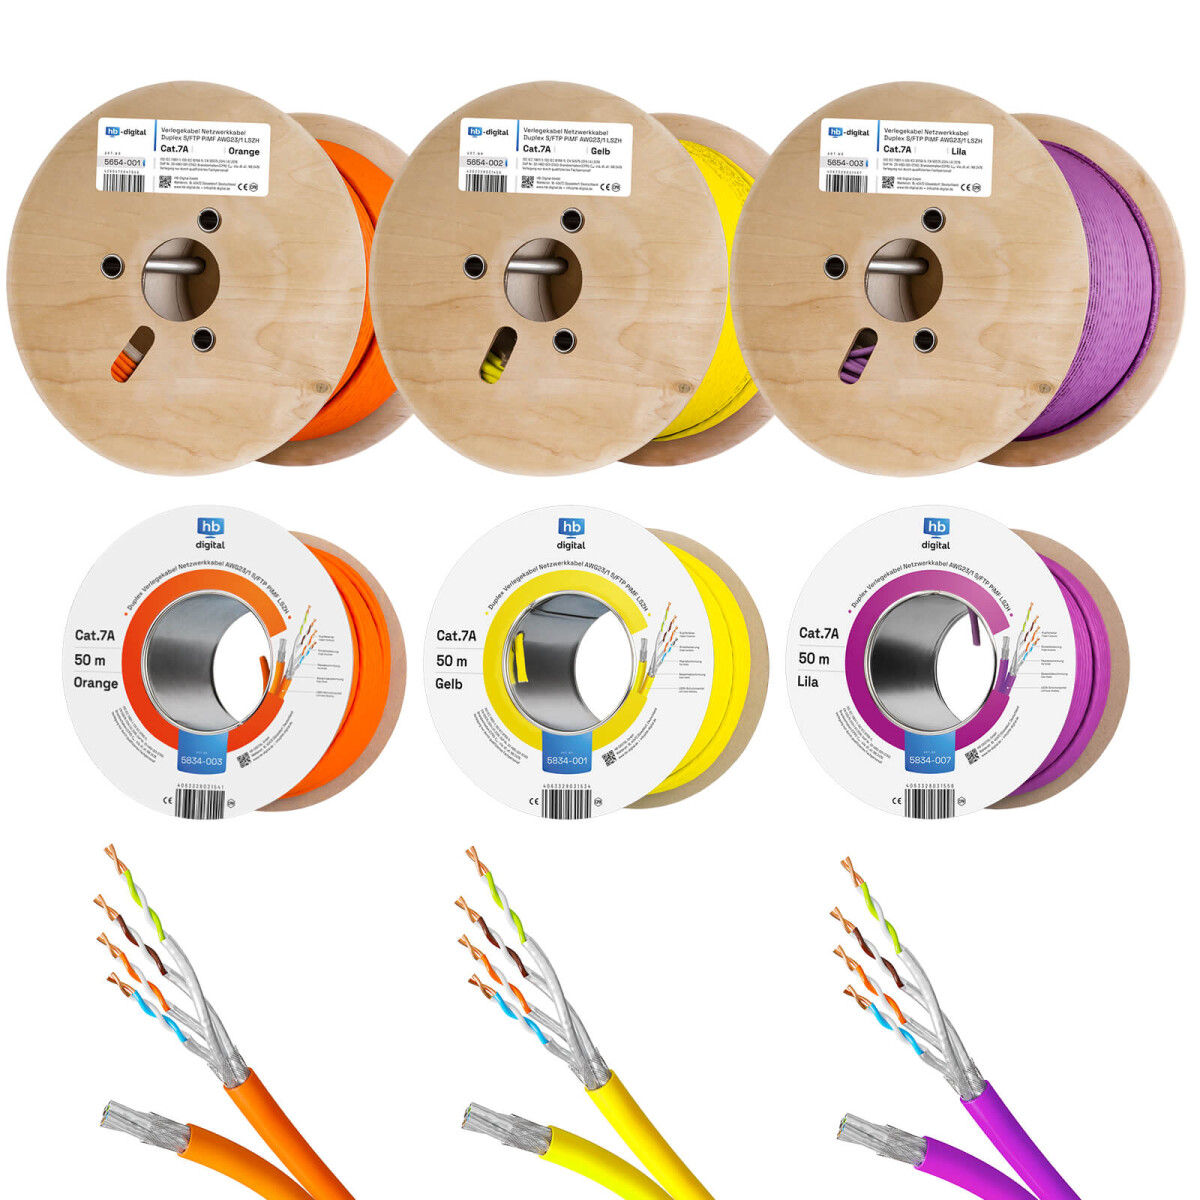 What's the difference between Cat7 and Cat7a cables?, Cat7 vs Cat7a cables?